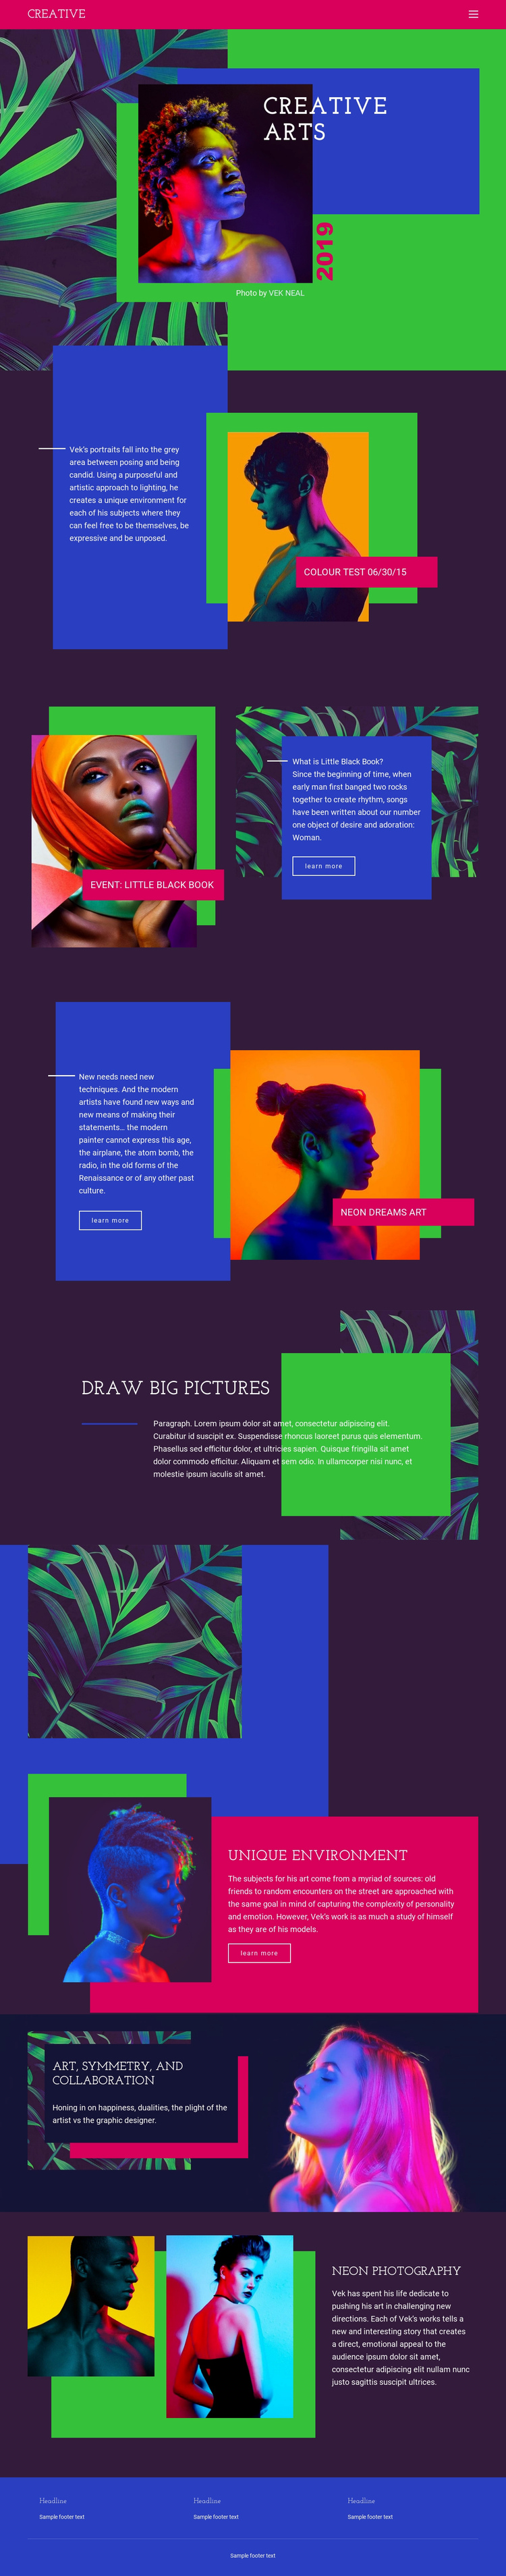 Creative Art Ideas One Page Template